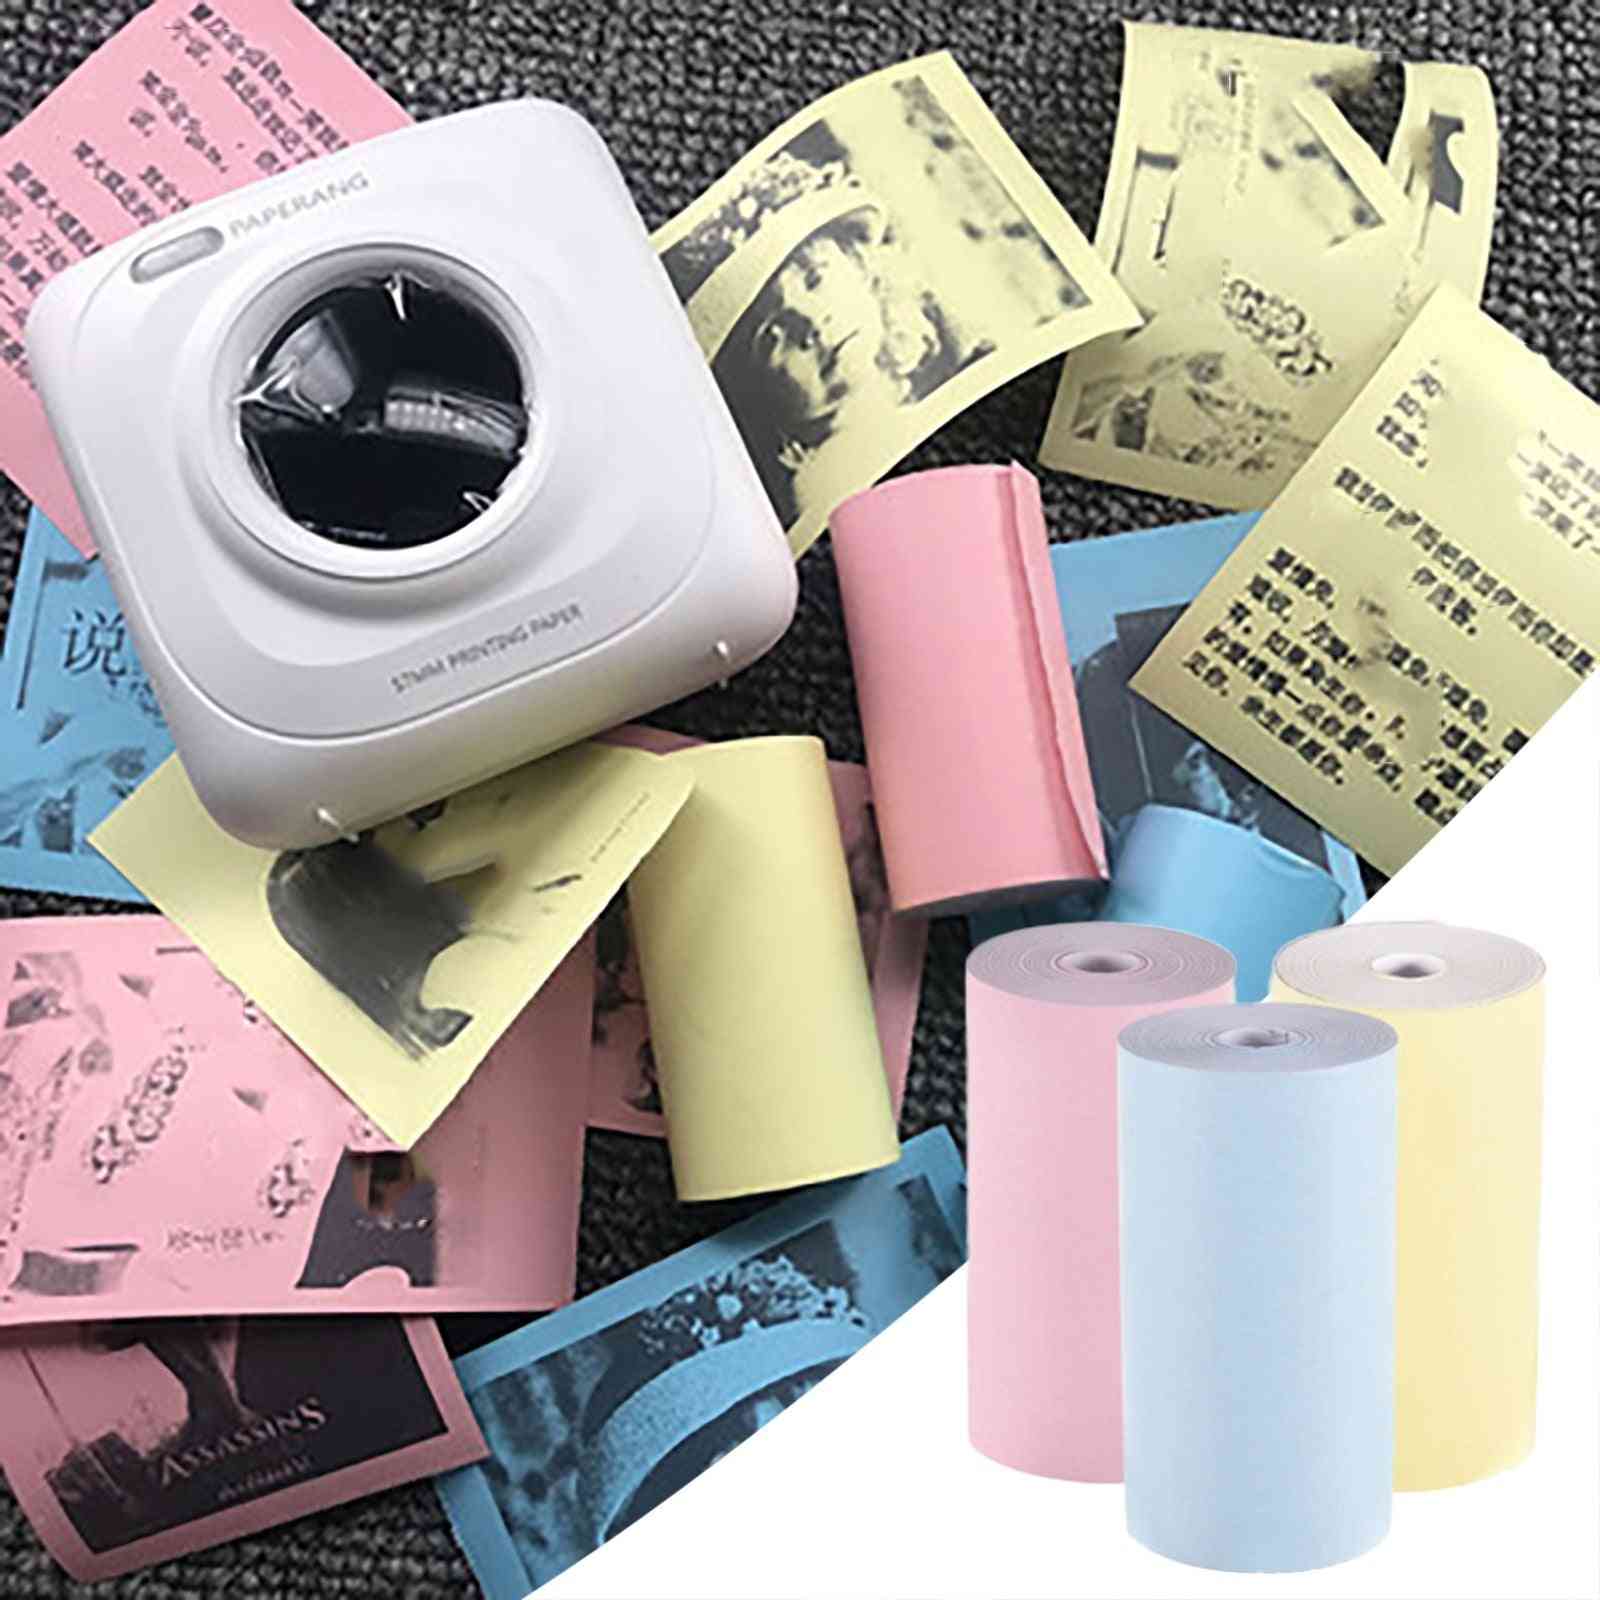 Thermal Label Sticker- Color Photo Paper